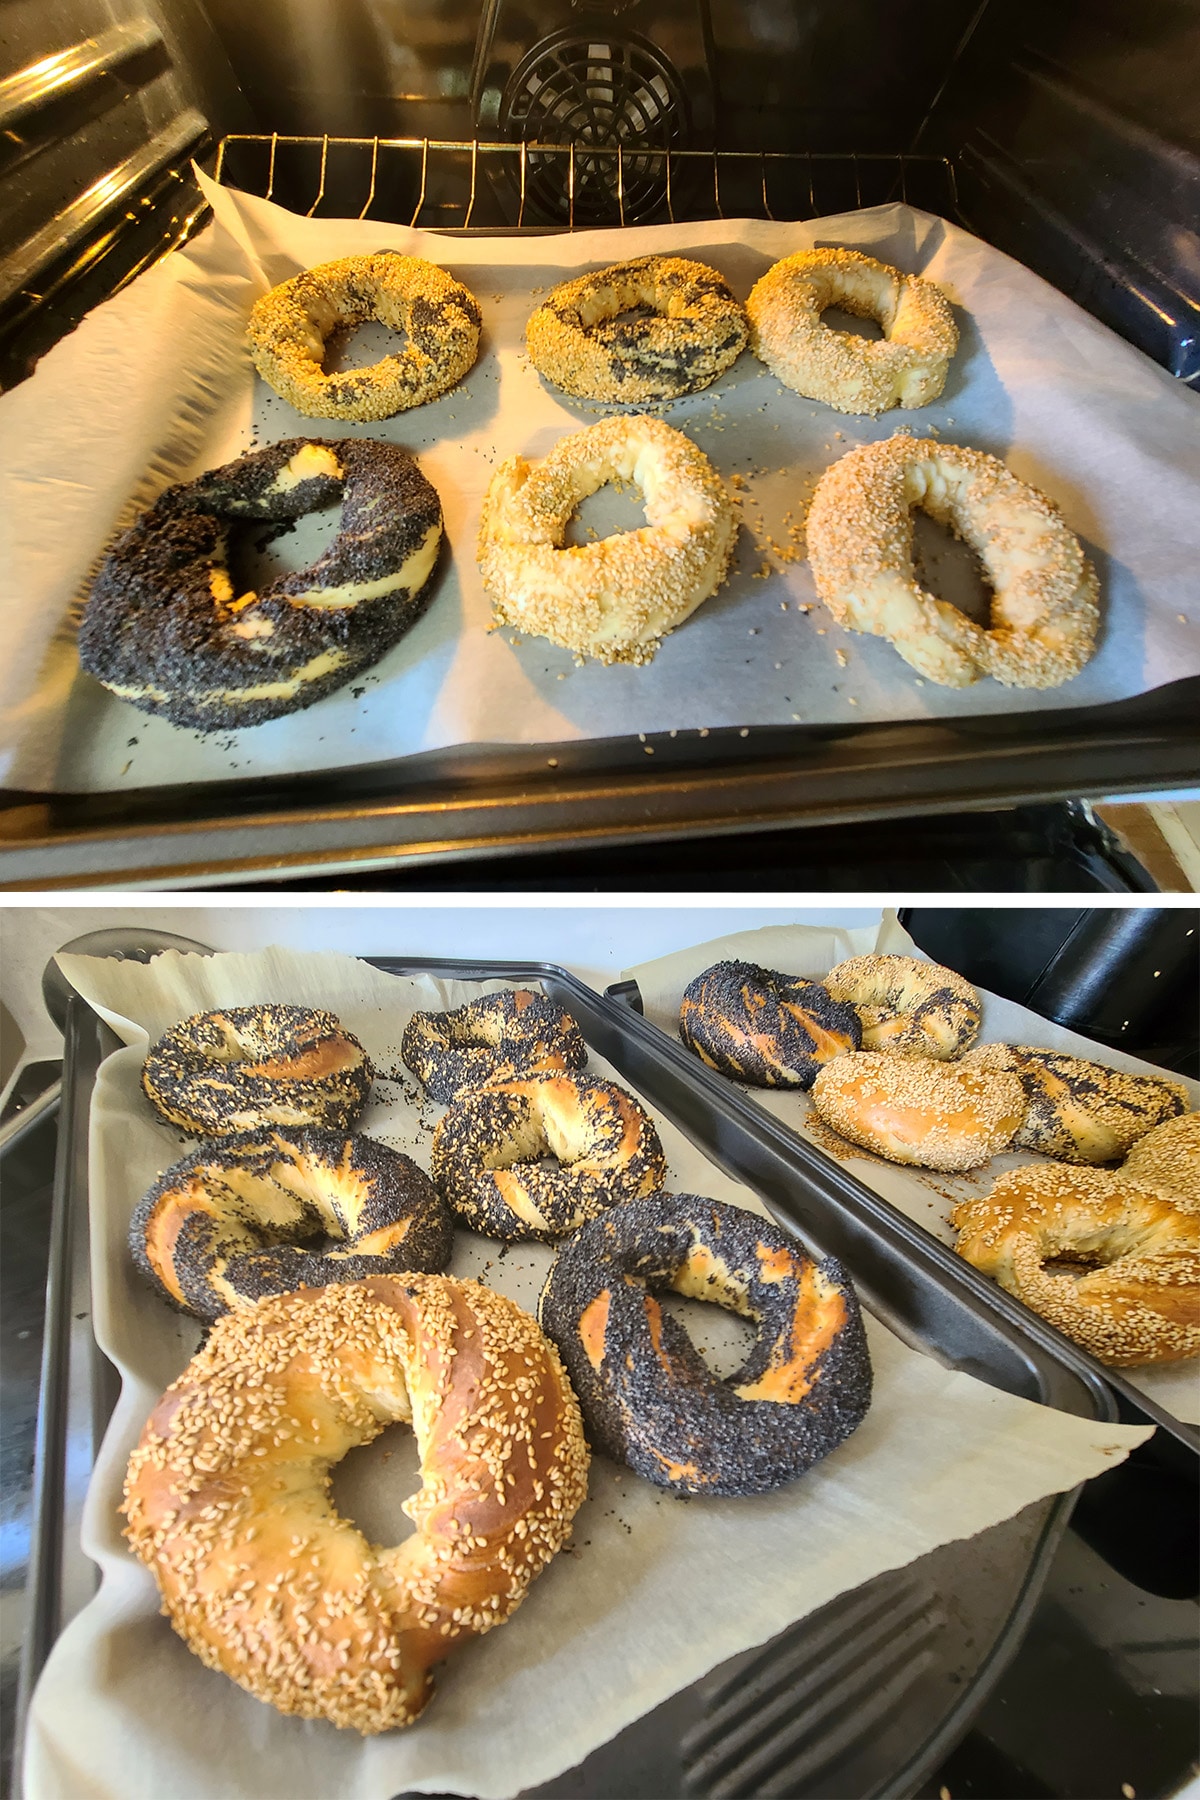 a 2 part image showing a pan of bagels going into the oven, and 2 pans of freshly baked Montreal bagels.